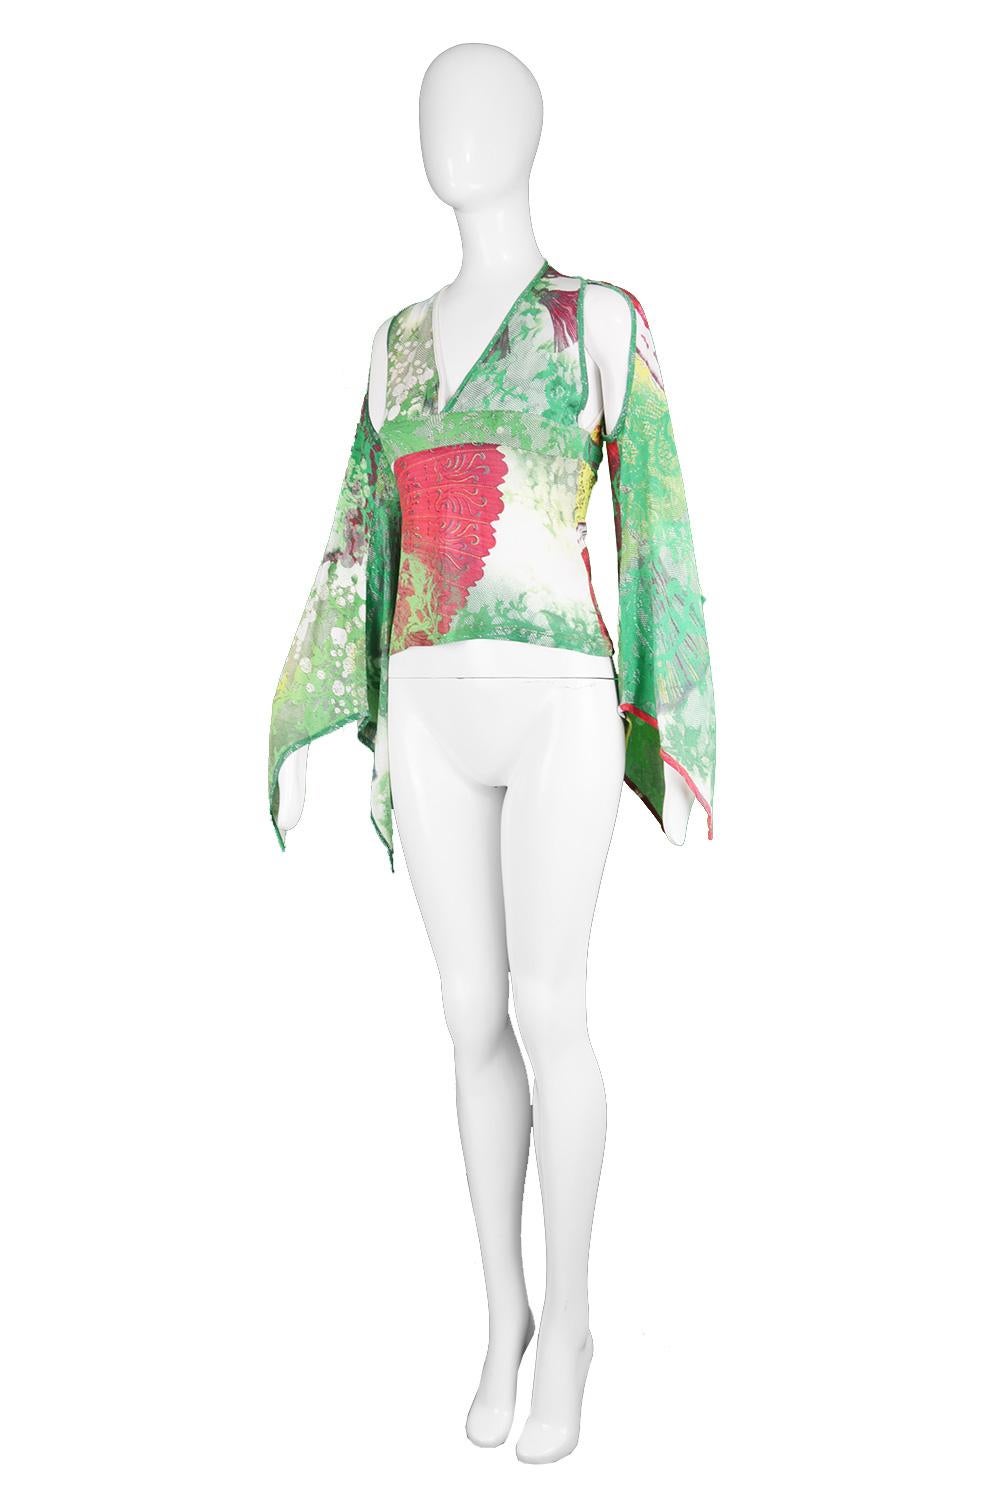 Just Cavalli Asian Long Cut Out Kimono Sleeve Green Modal Jersey Top  In Excellent Condition In Doncaster, South Yorkshire